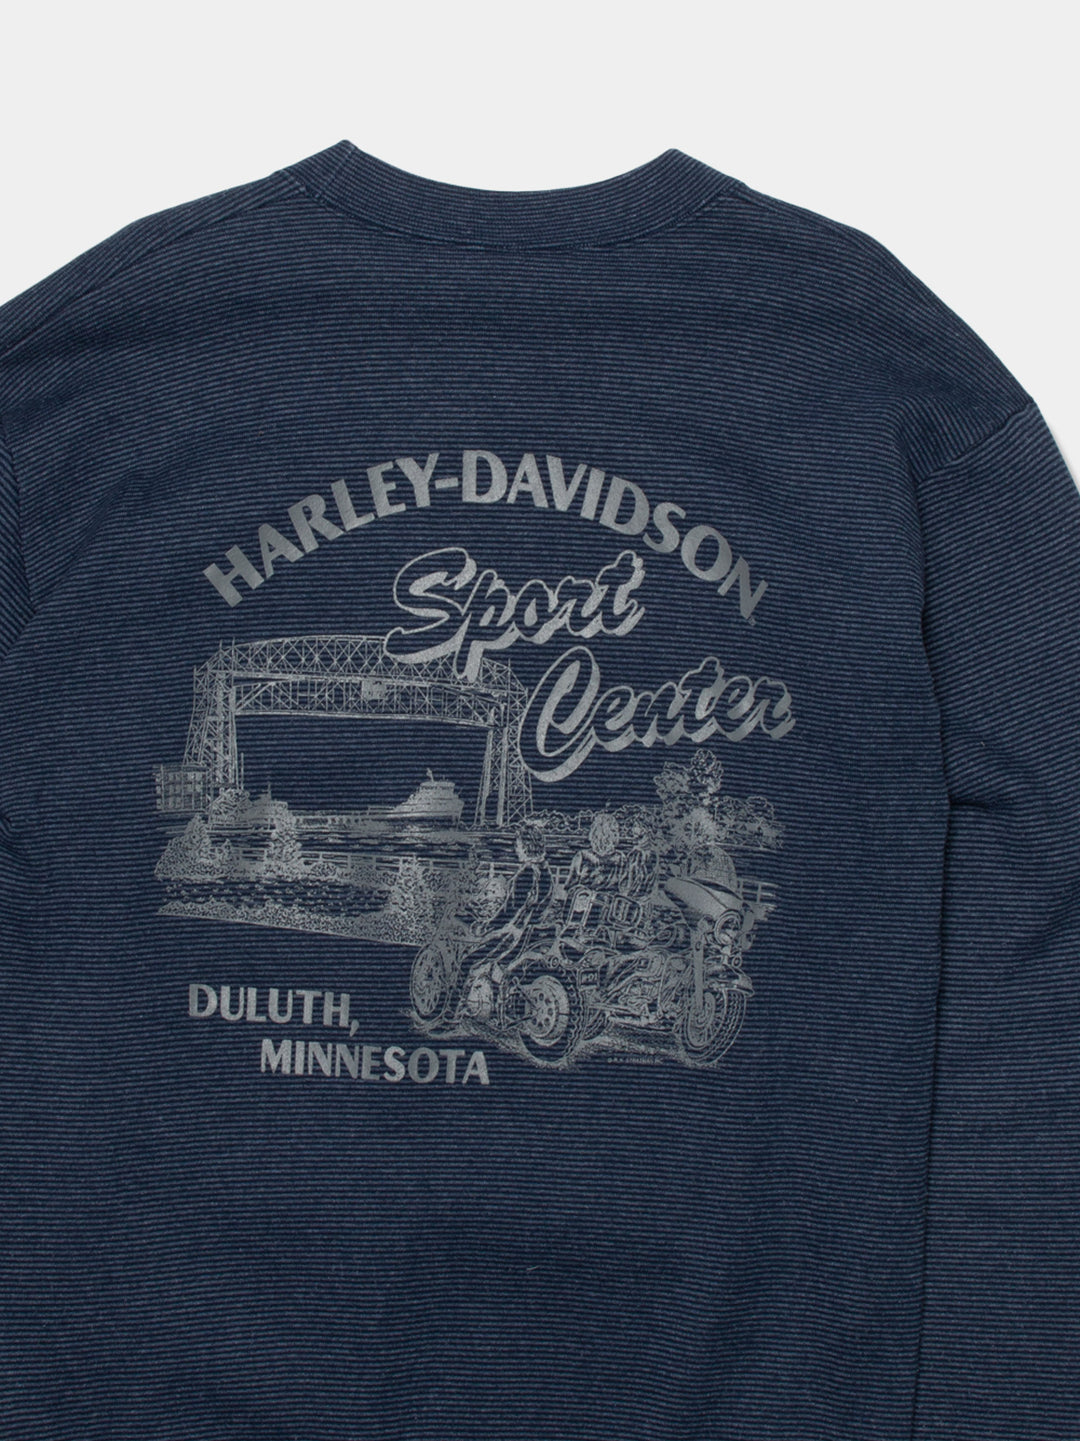 90s Harley Davidson Spell Out Sweat (M)